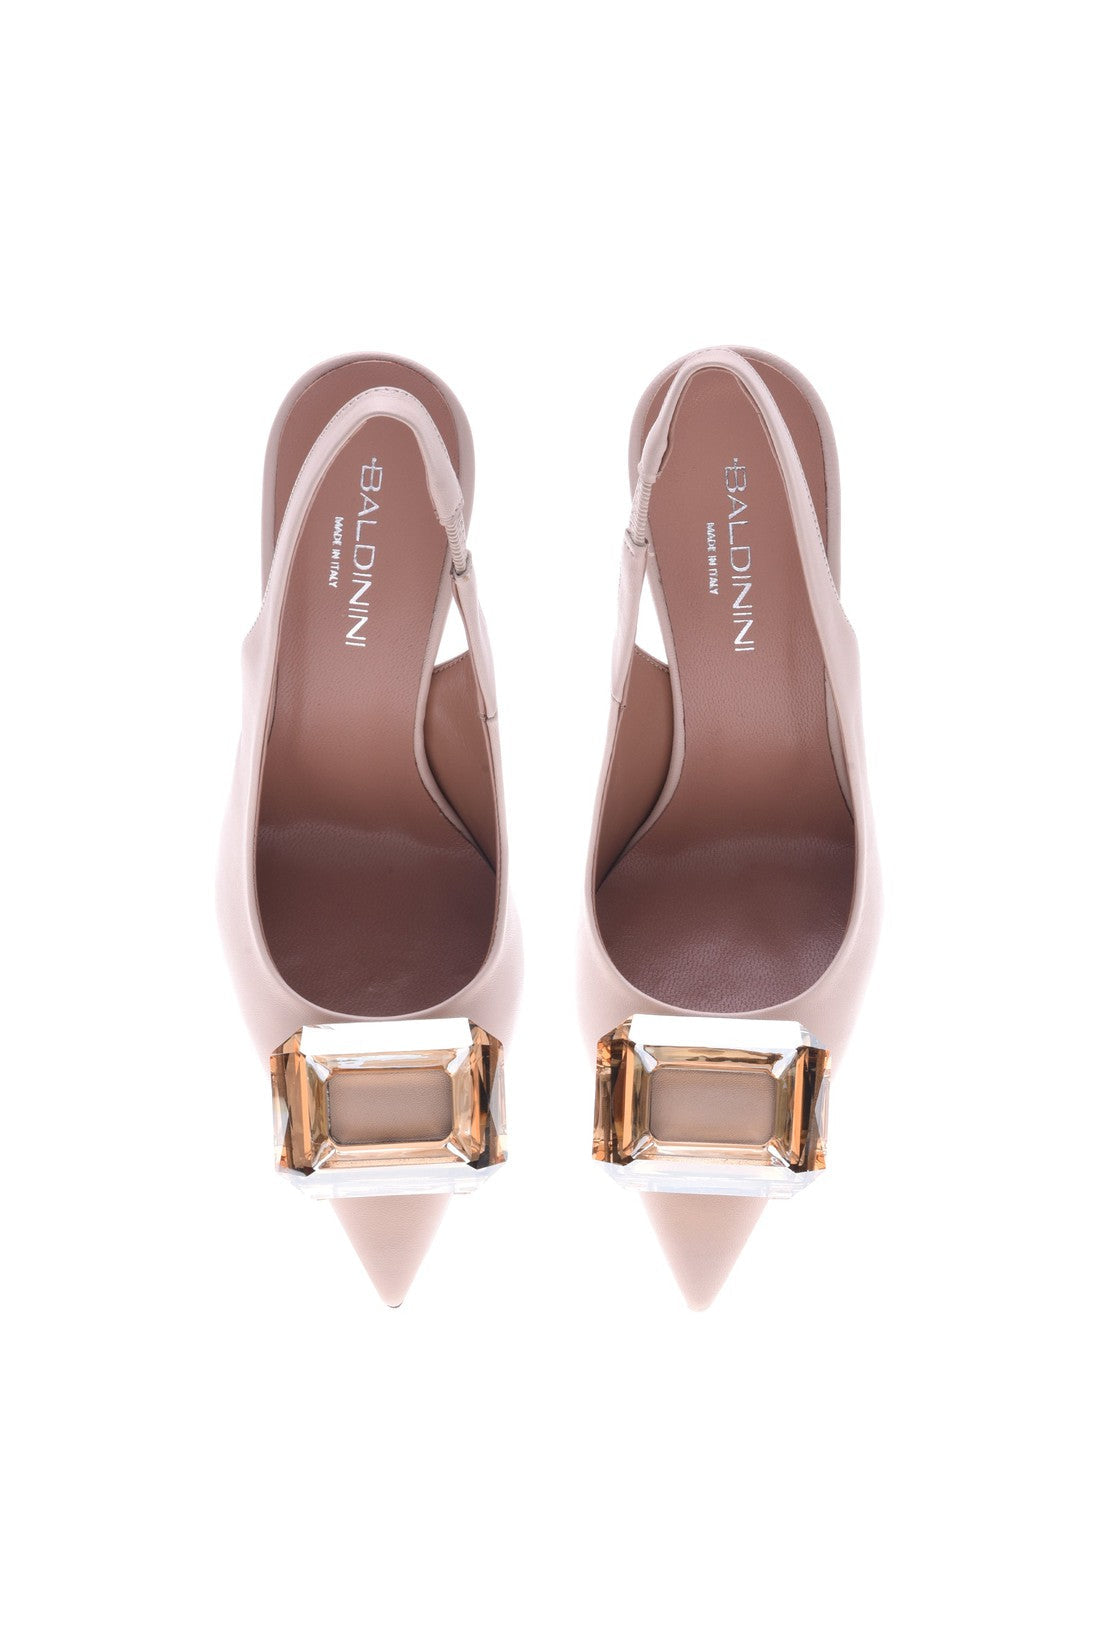 Slingbacks in taupe nappa leather